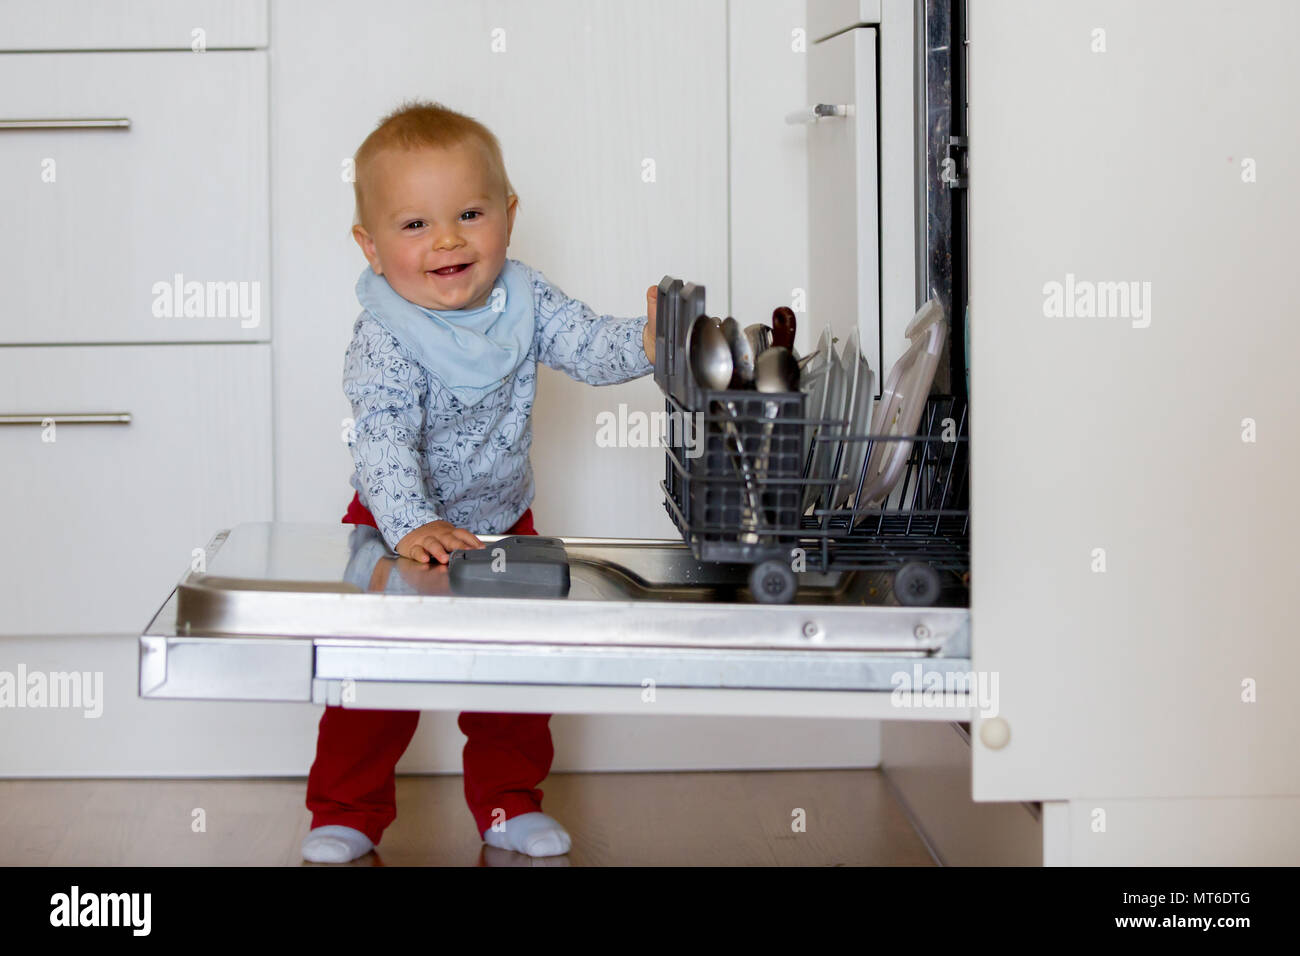 Toddler child, boy, helping mom, putting dirty dishes in dishwasher at home, modern kitchen Stock Photo